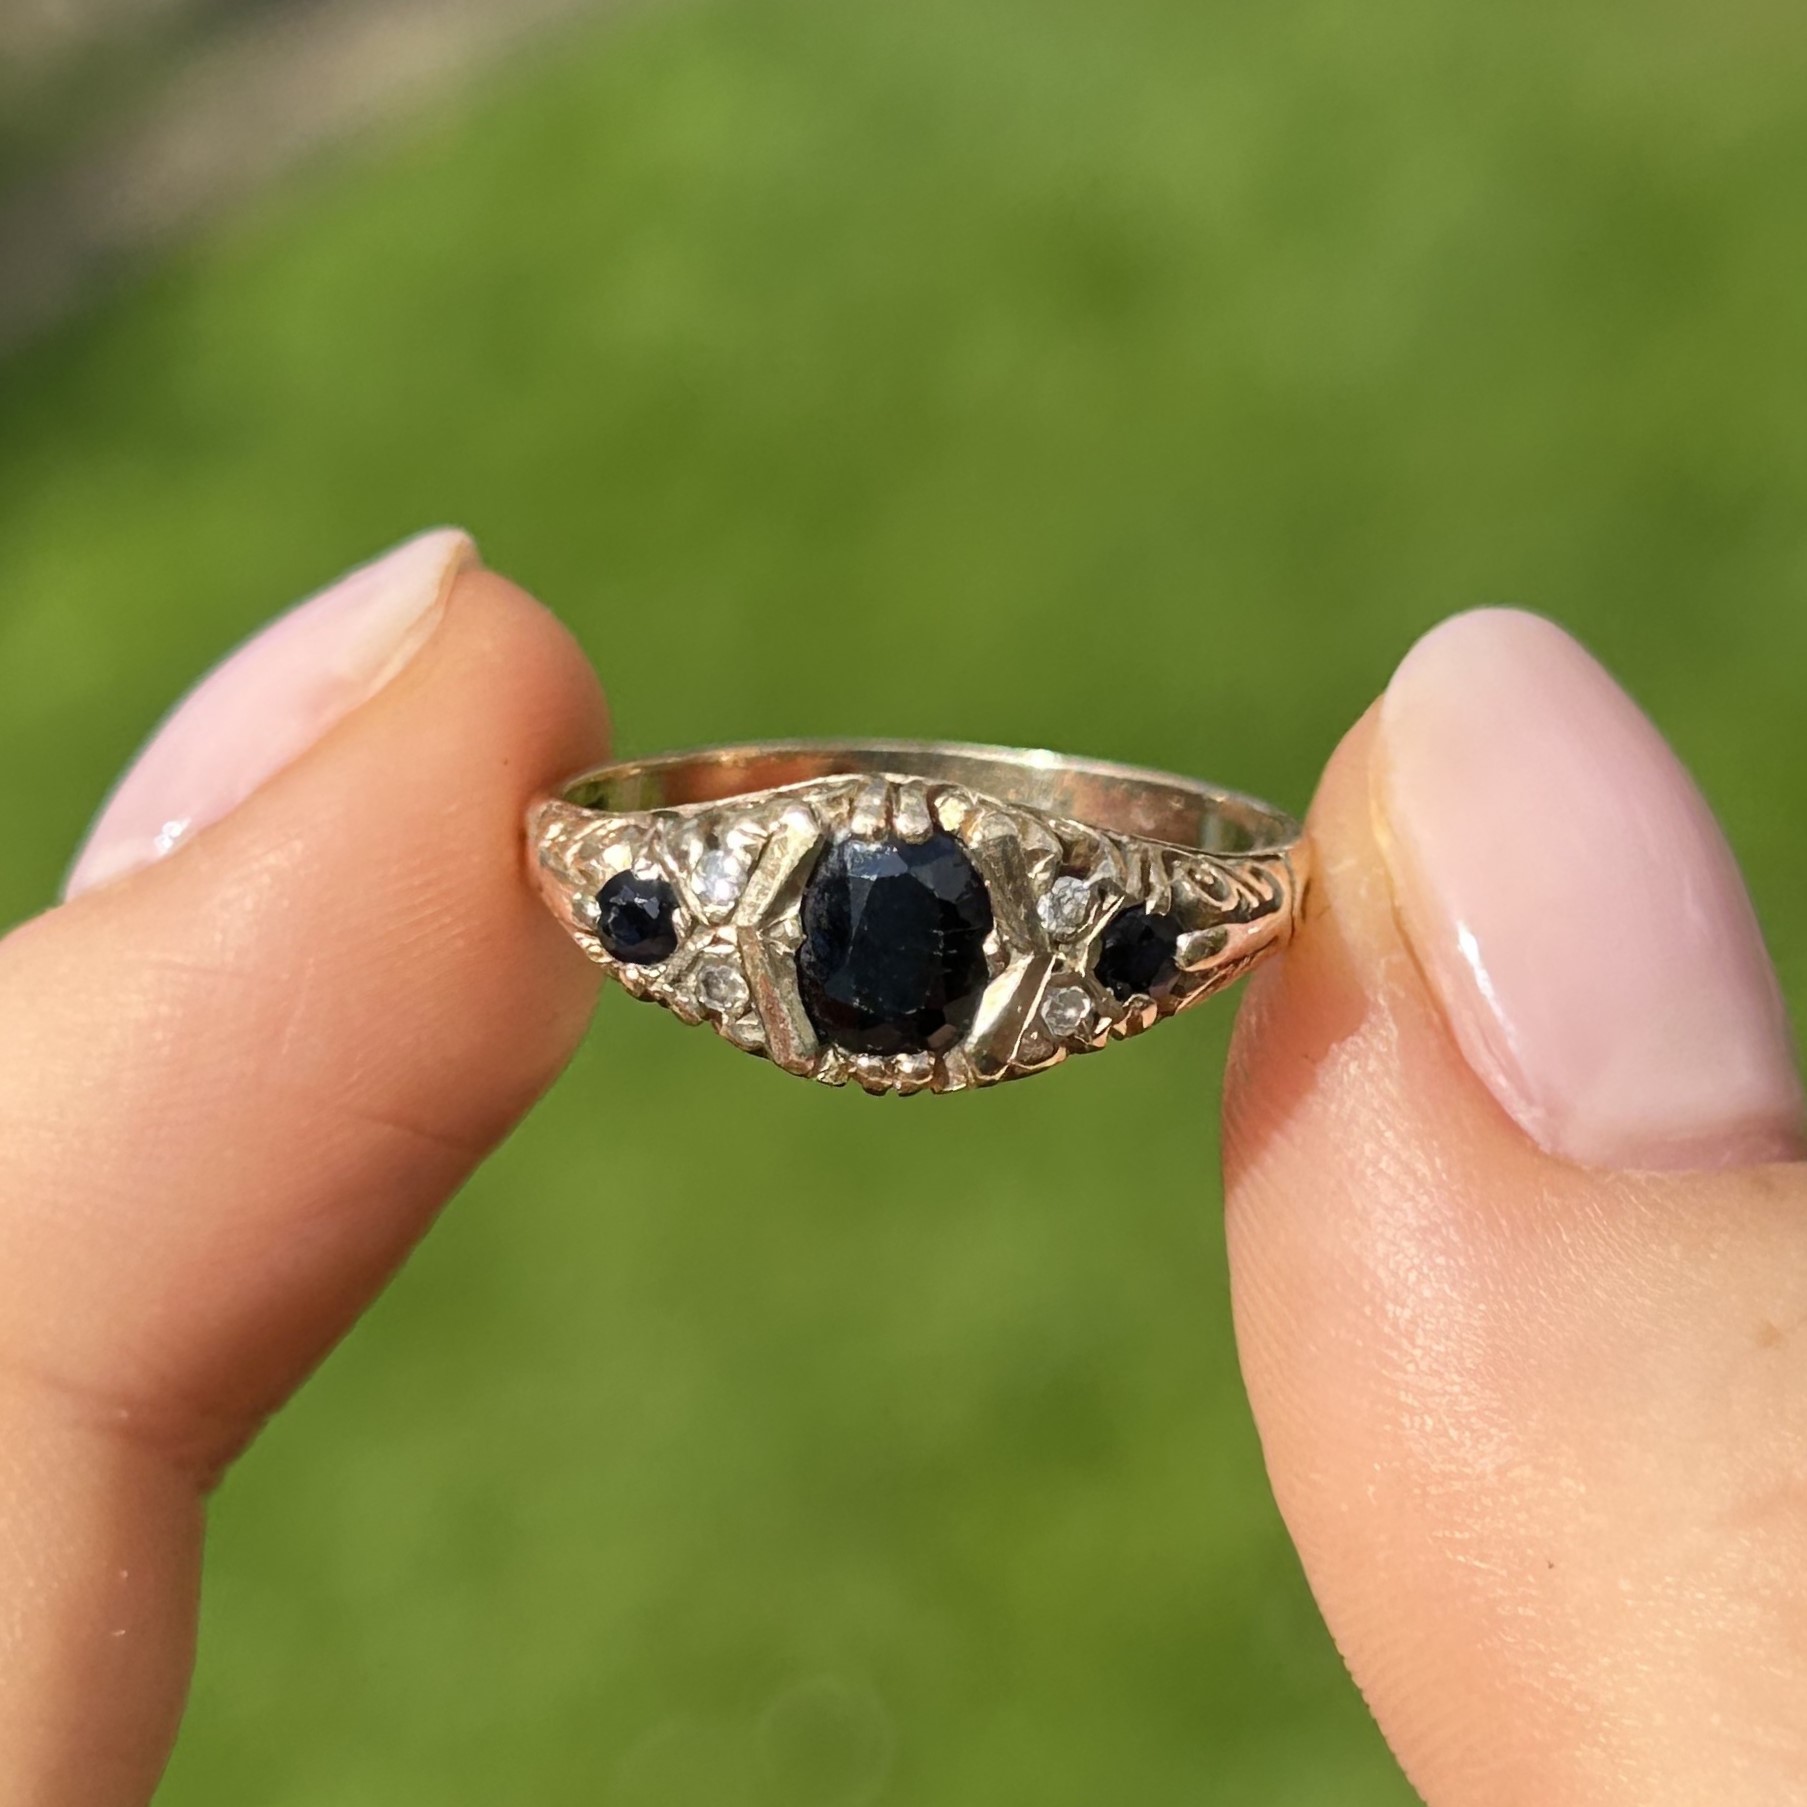 9ct gold vintage sapphire & diamond ring with a scroll patterned gallery Size P 2.5 g